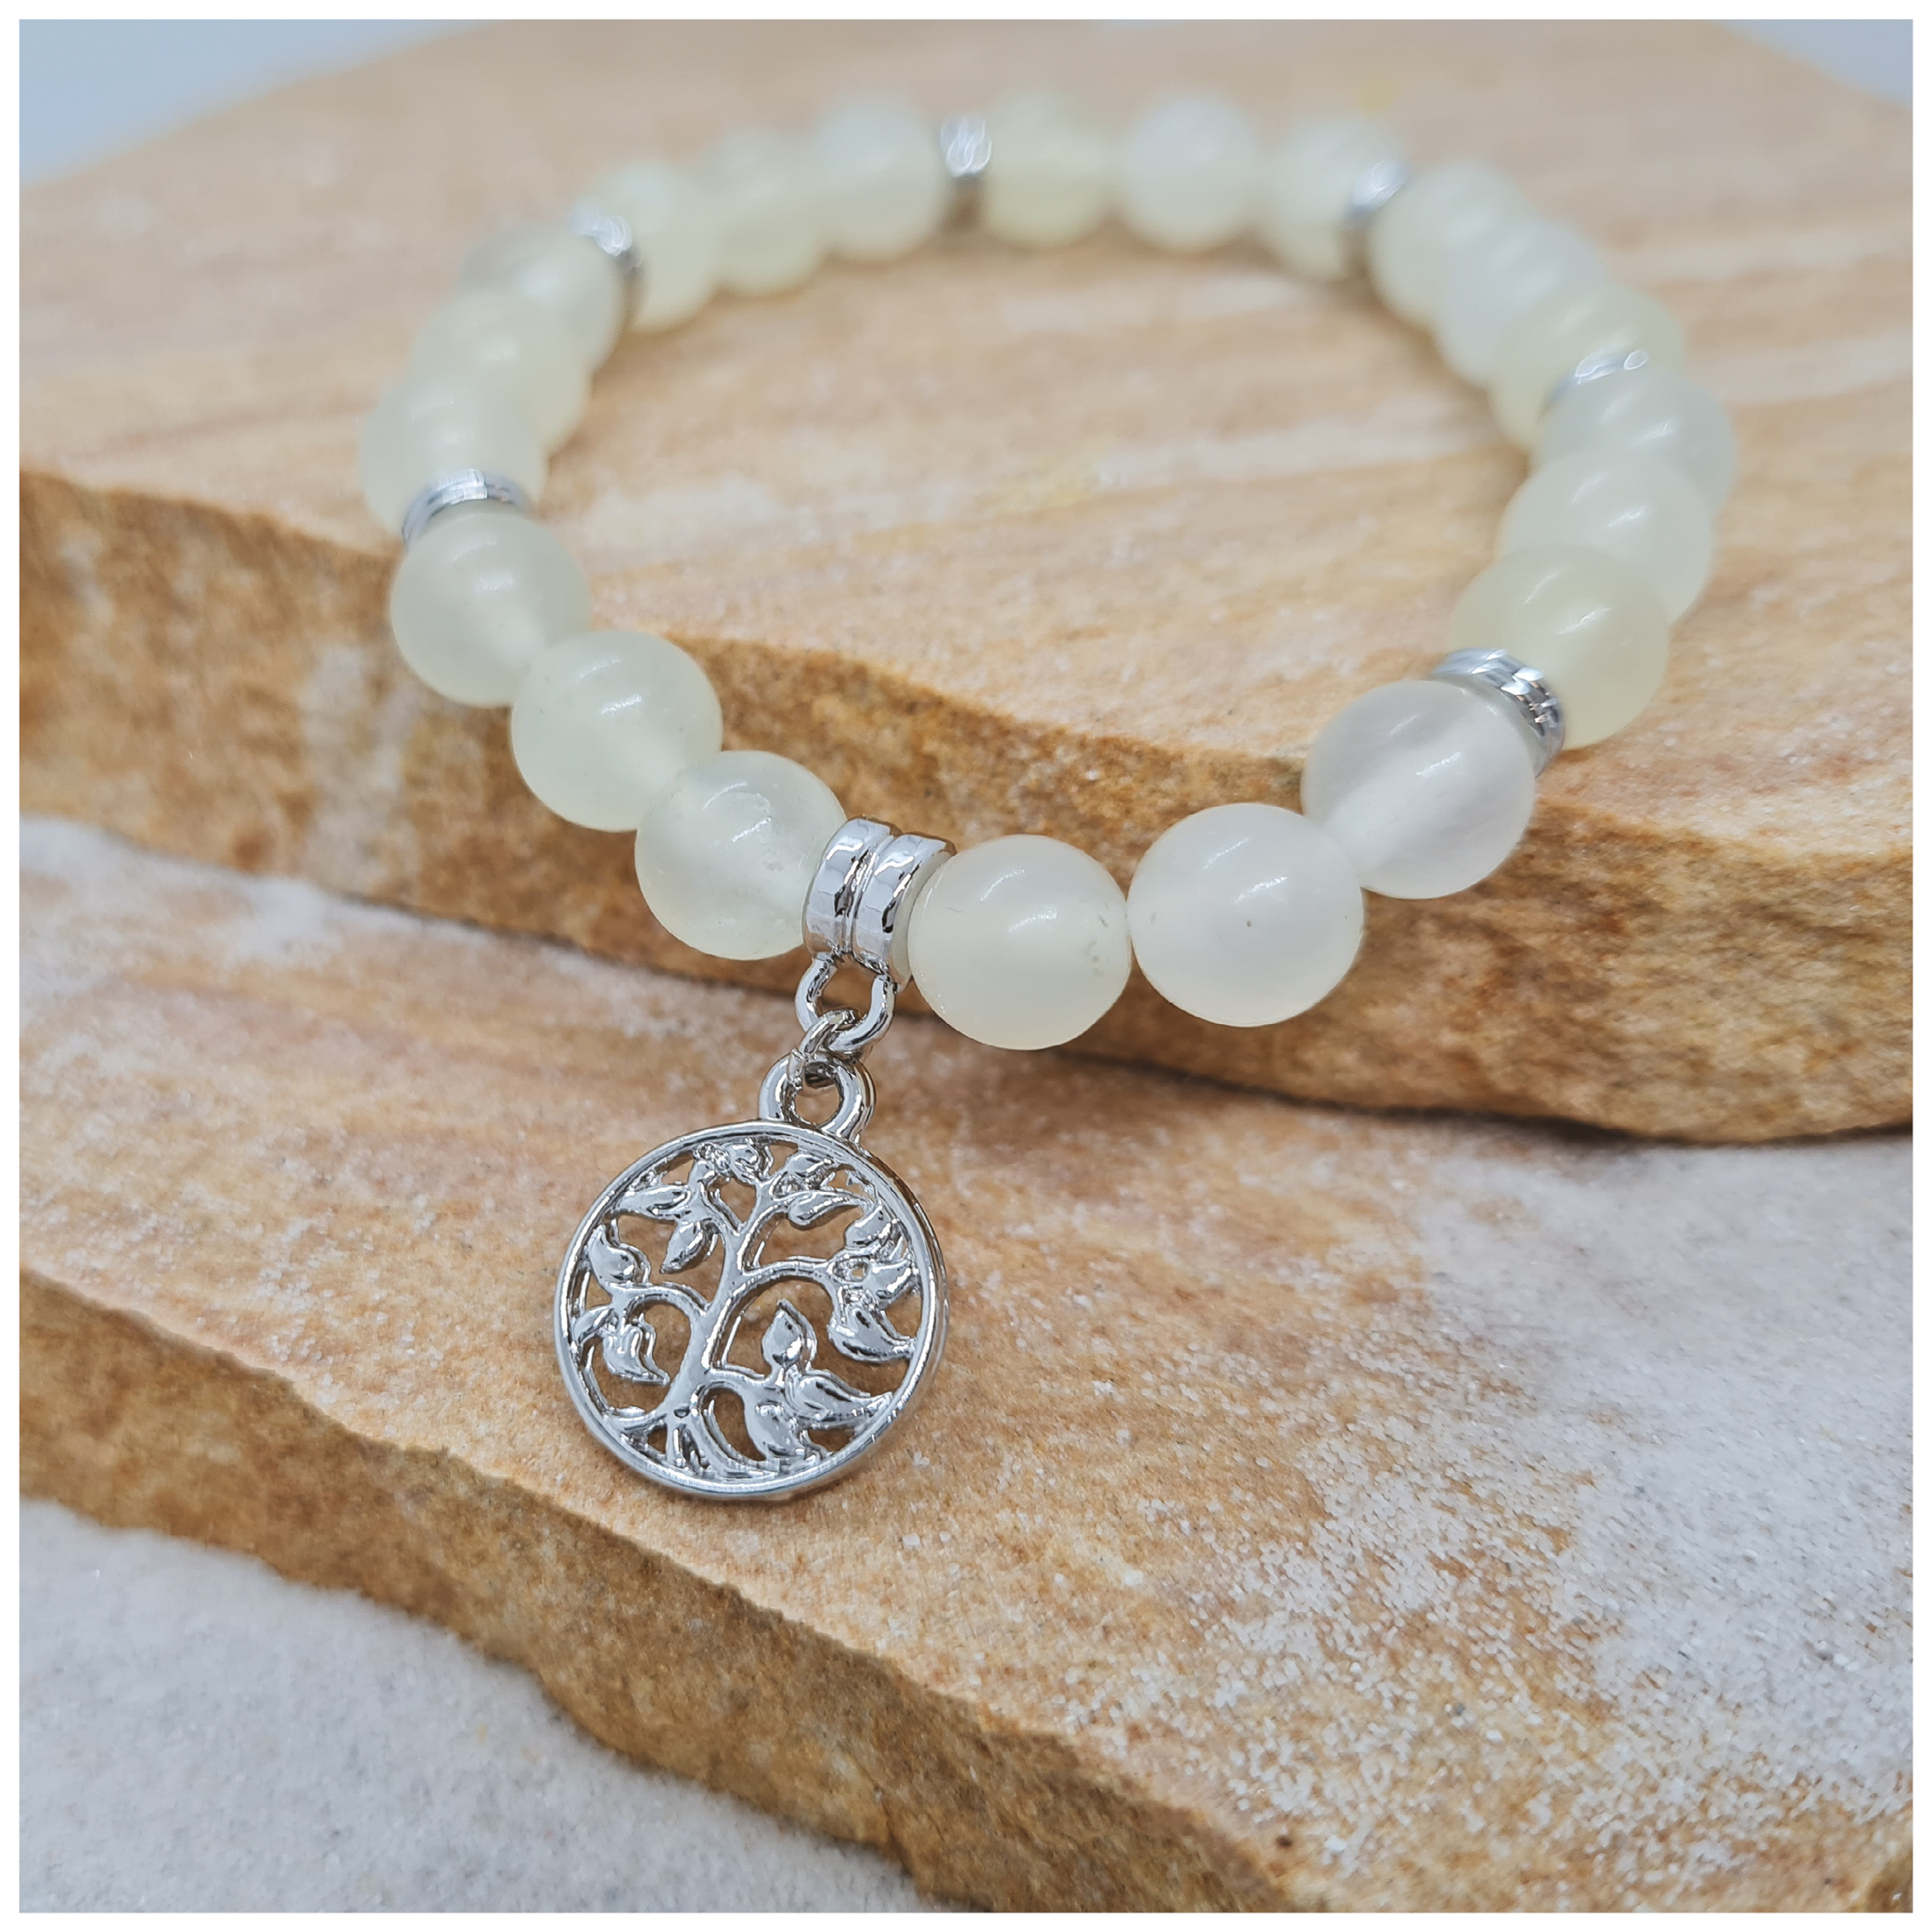 New Jade 6mm crystal bead bracelet twin set with silver tree of life charm